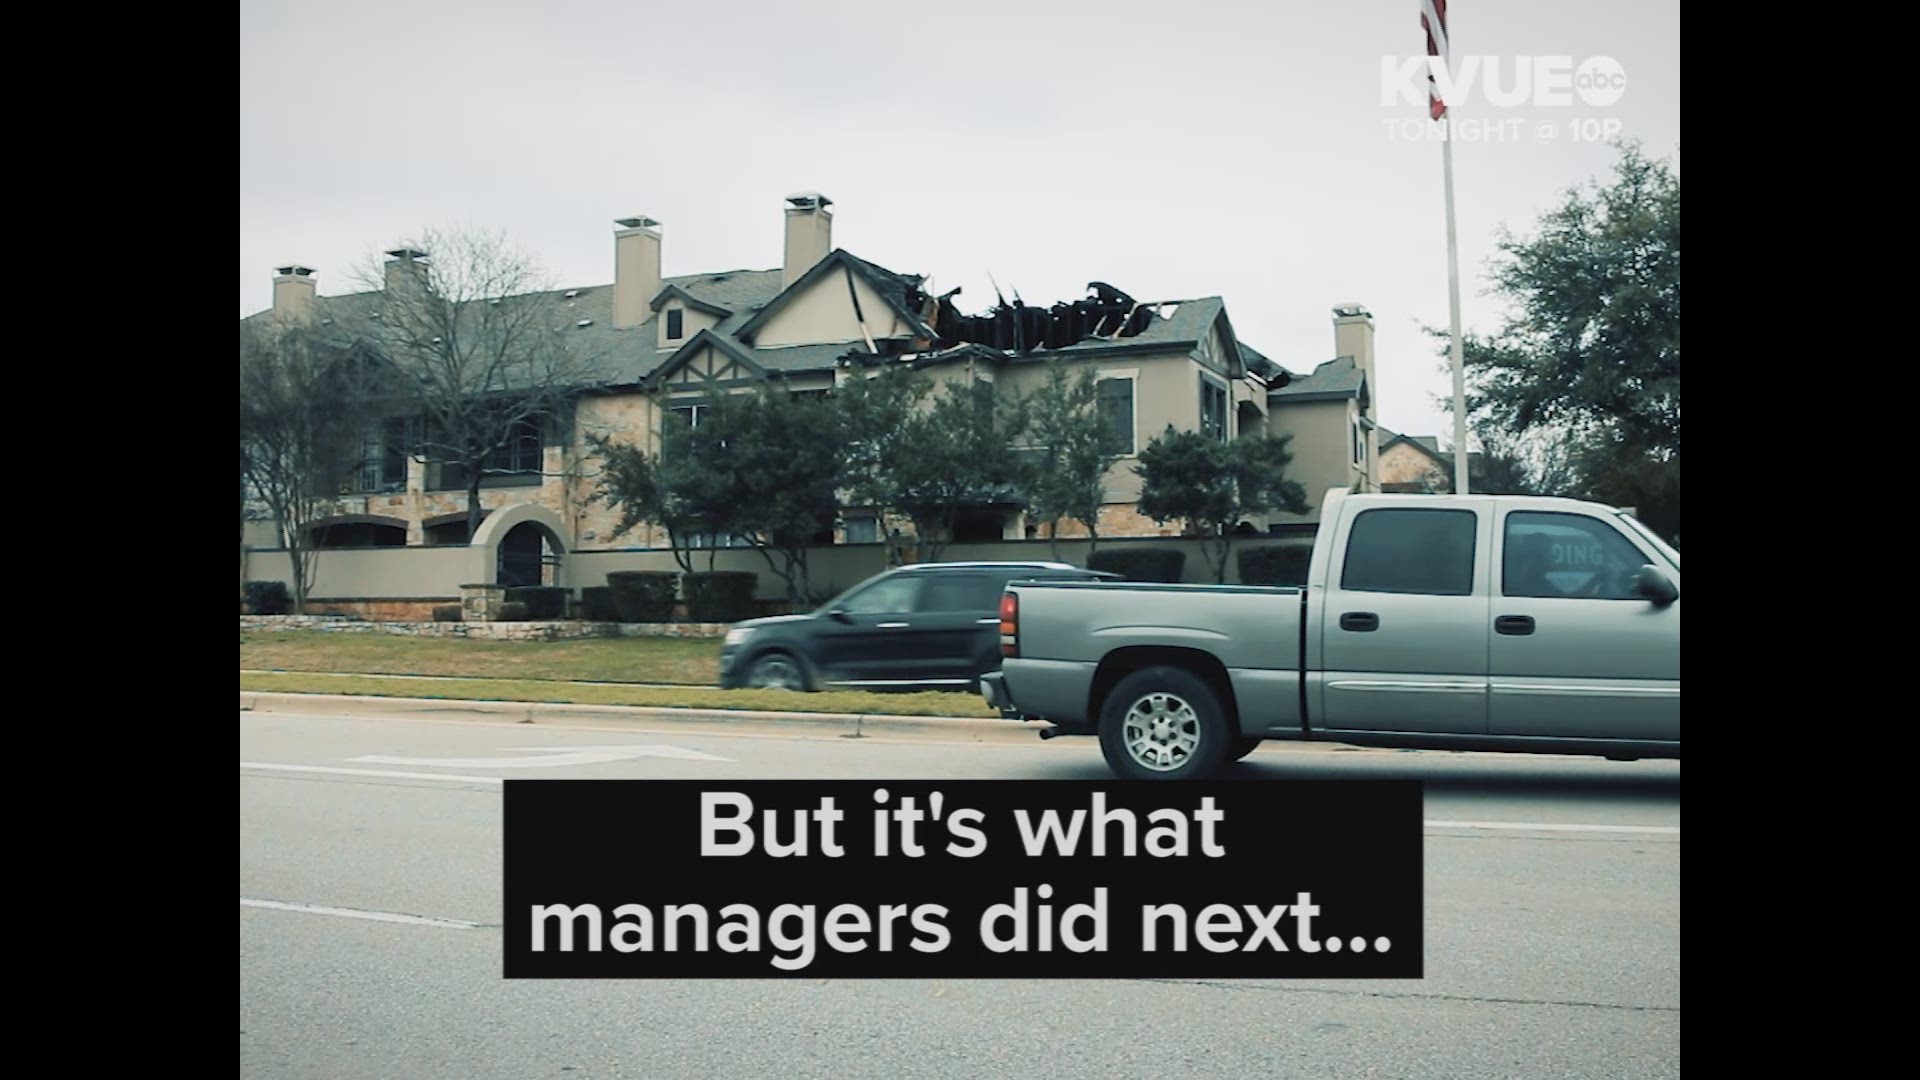 An apartment fire forced people out of their homes. But it’s what managers did next that had renters calling the KVUE Defenders.